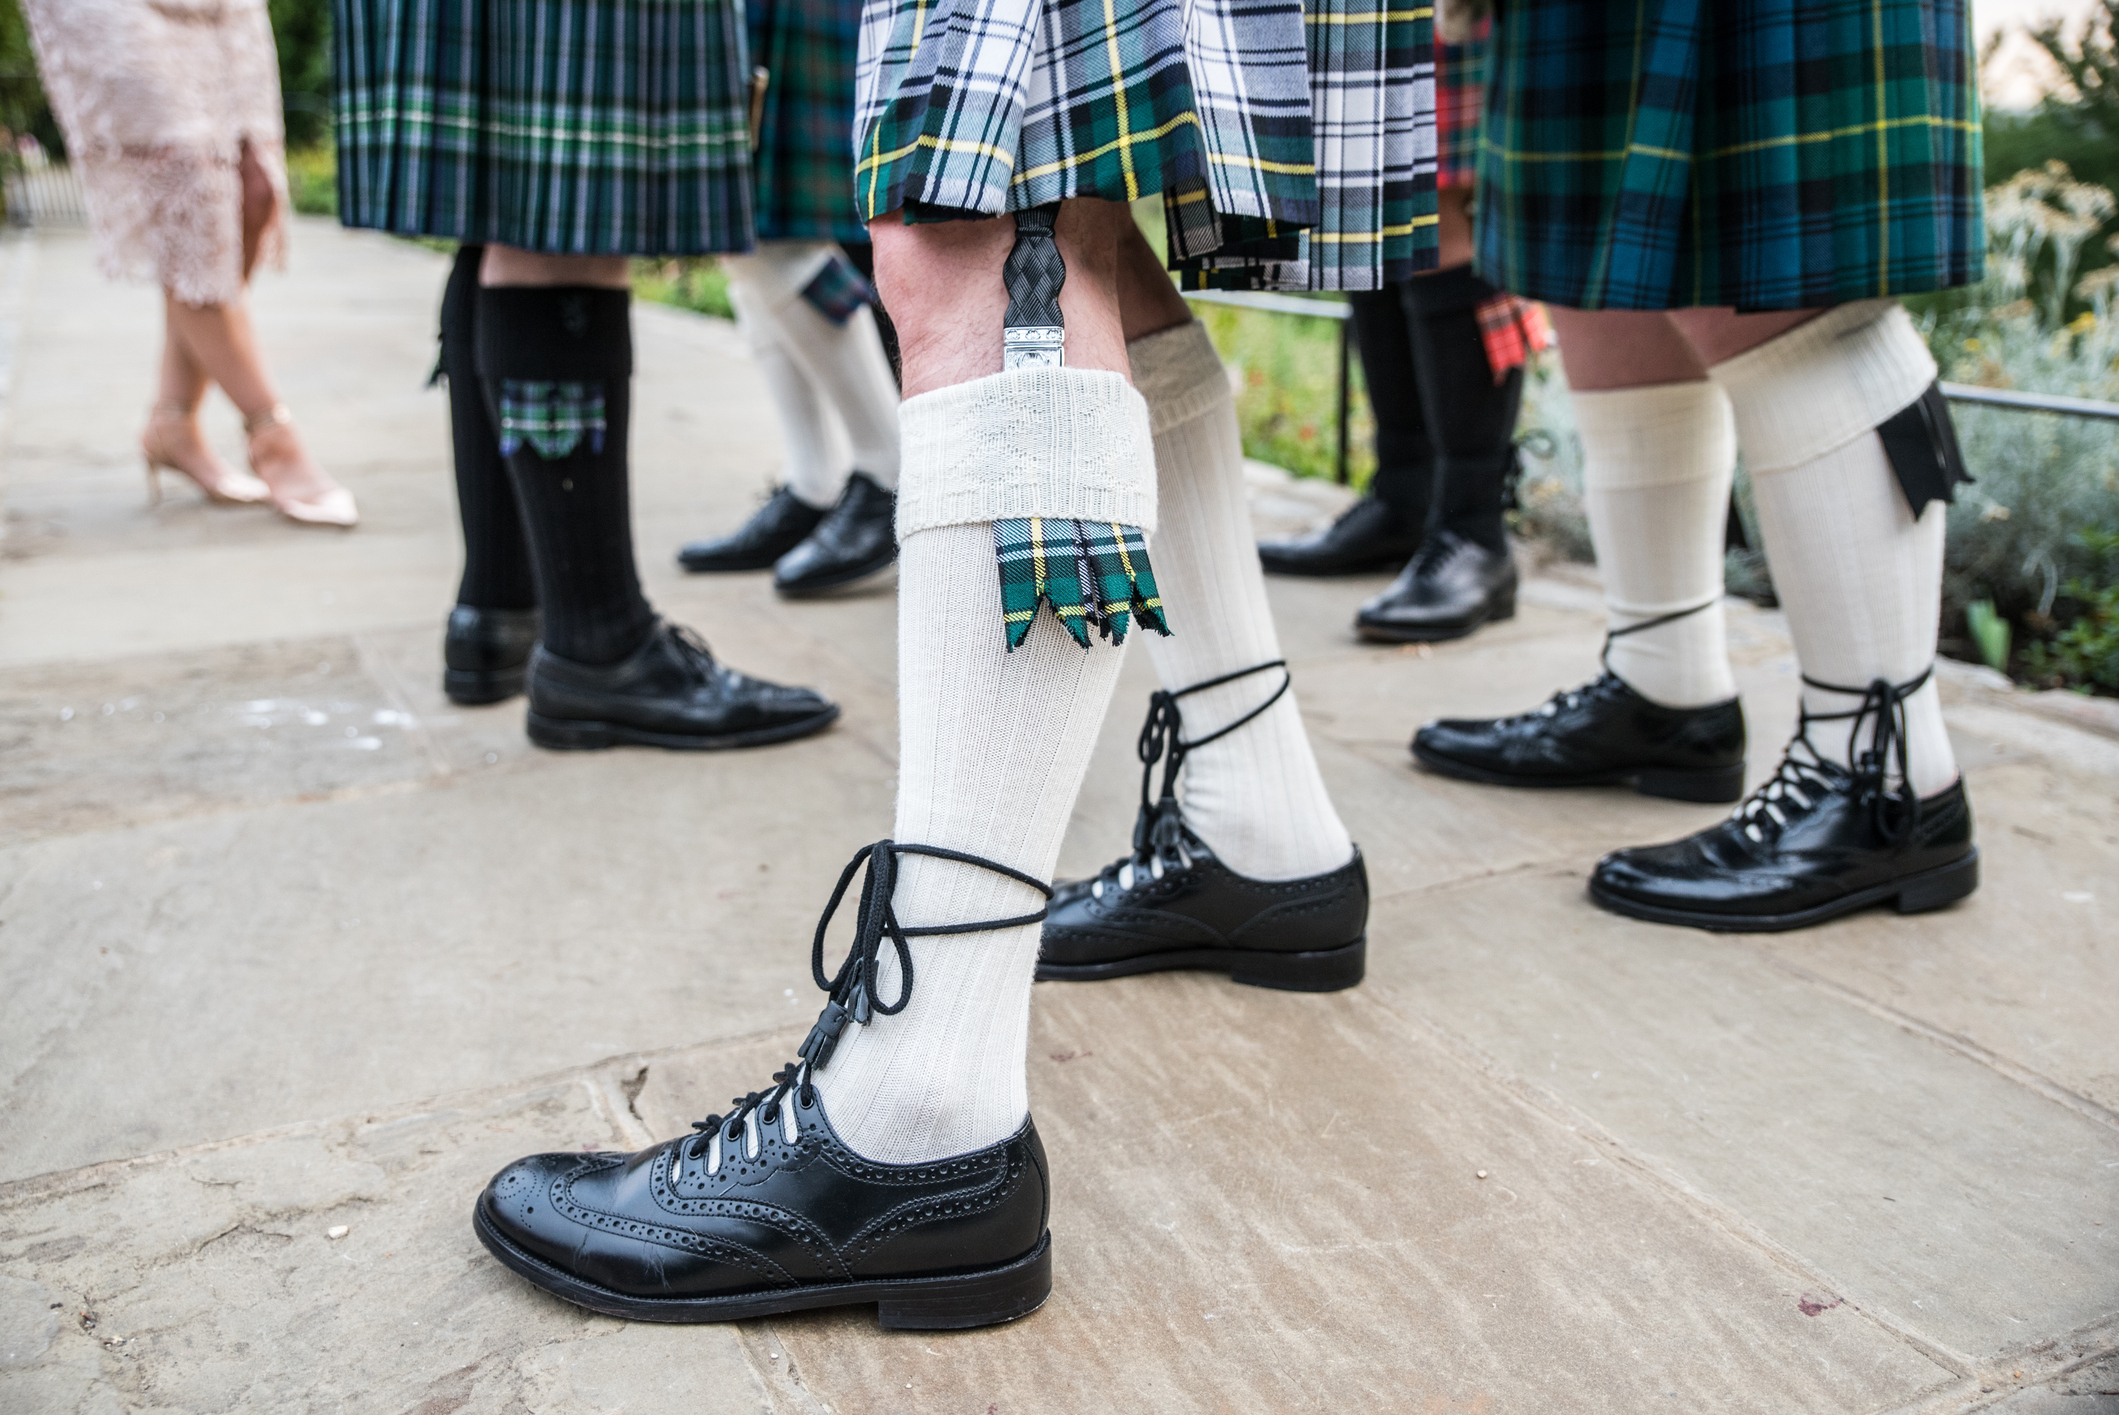 People in kilts and traditional Scottish attire at a wedding